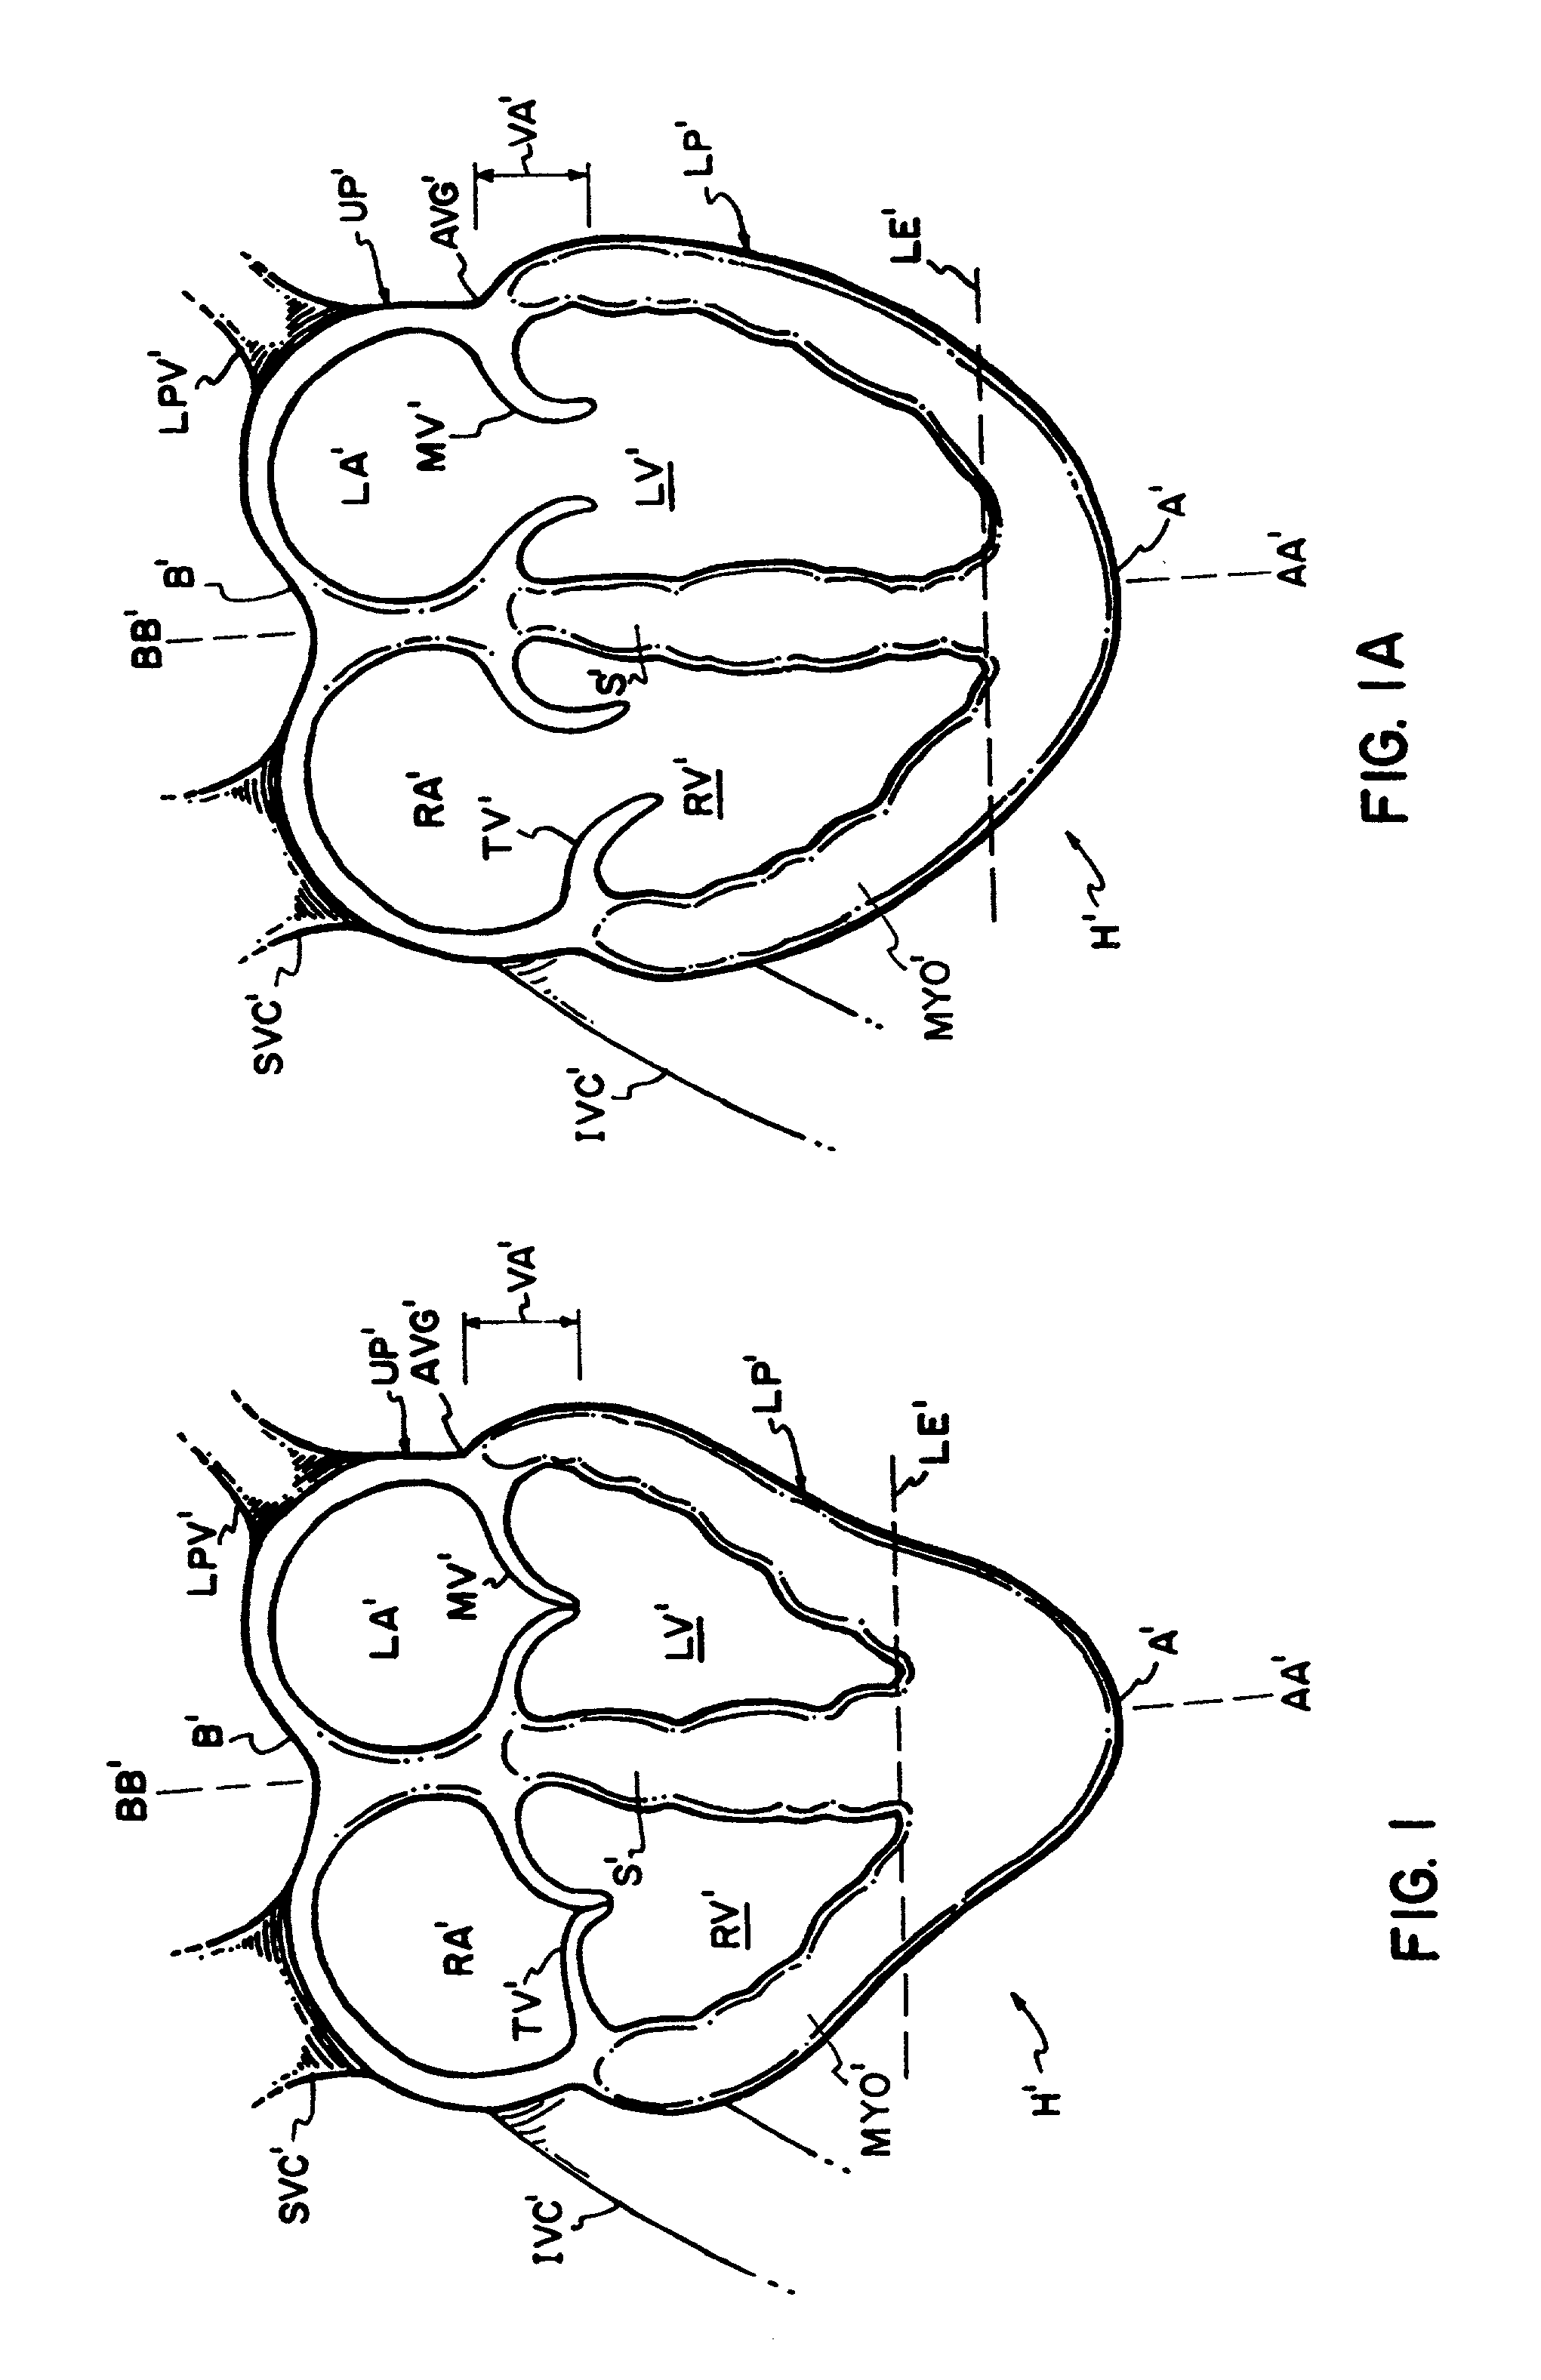 Device for heart measurement